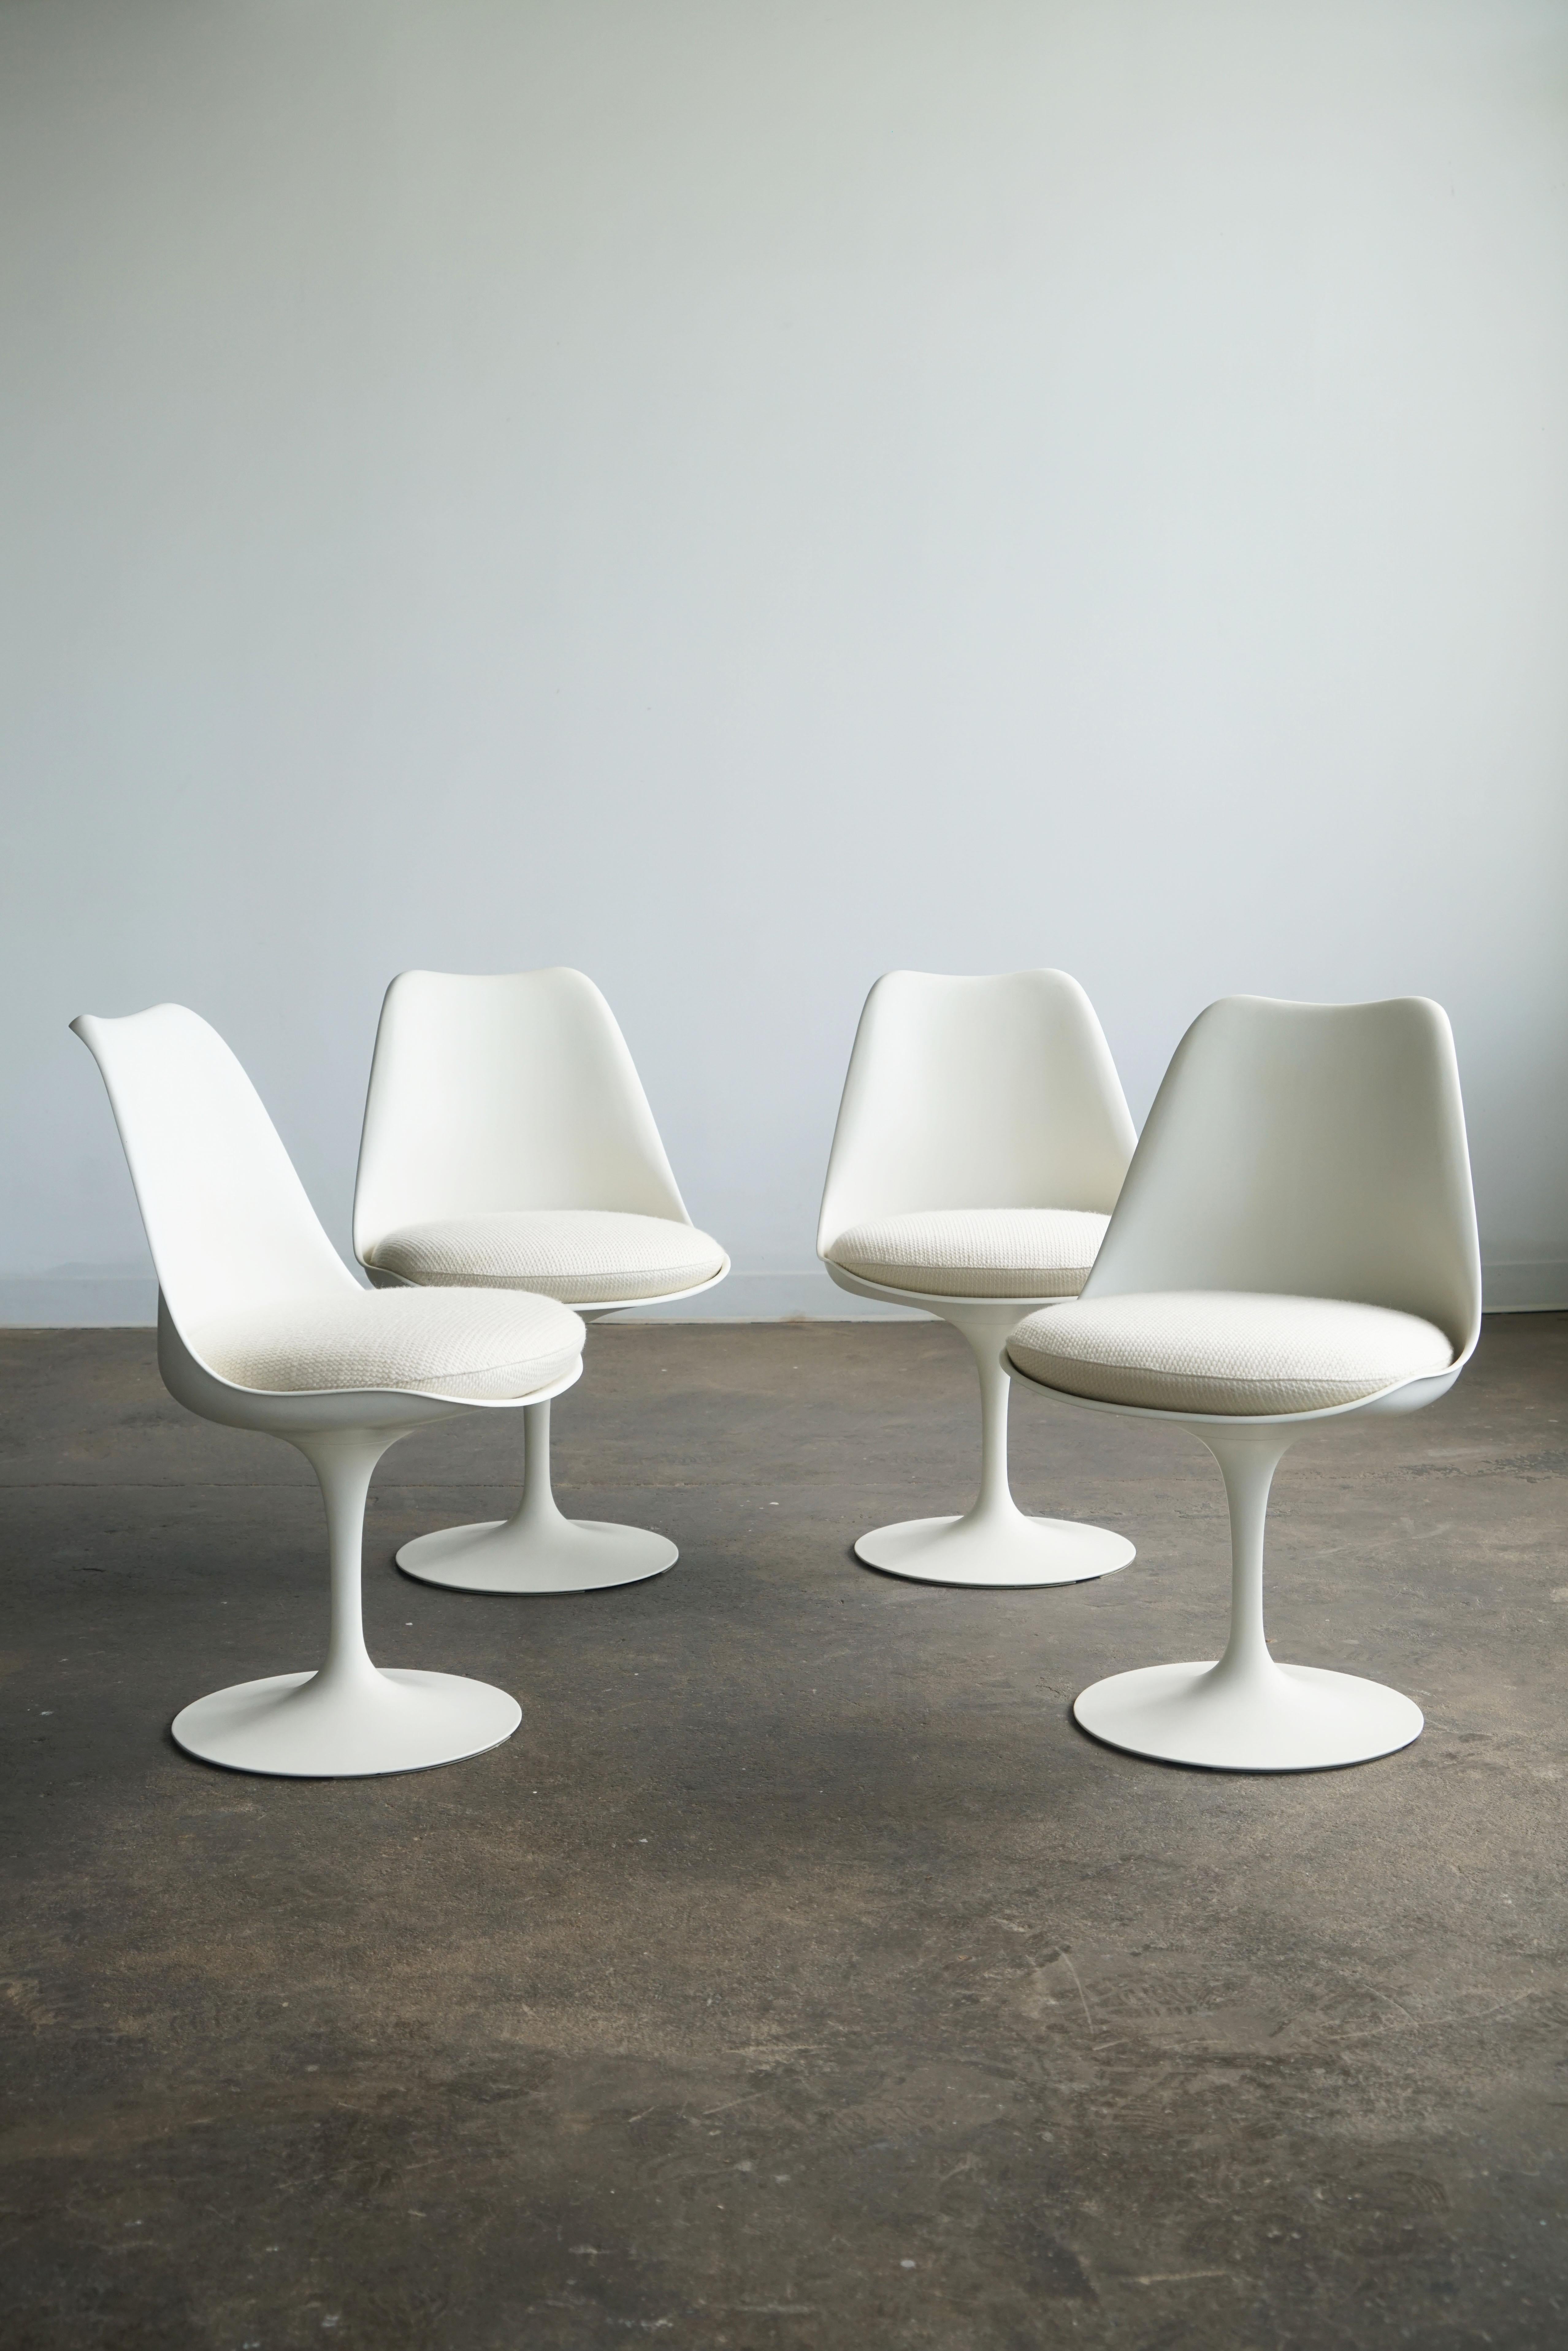 1960's Eero Saarinen Tulip dining chairs for Knoll, set of 4 upholstered In Good Condition For Sale In Chicago, IL